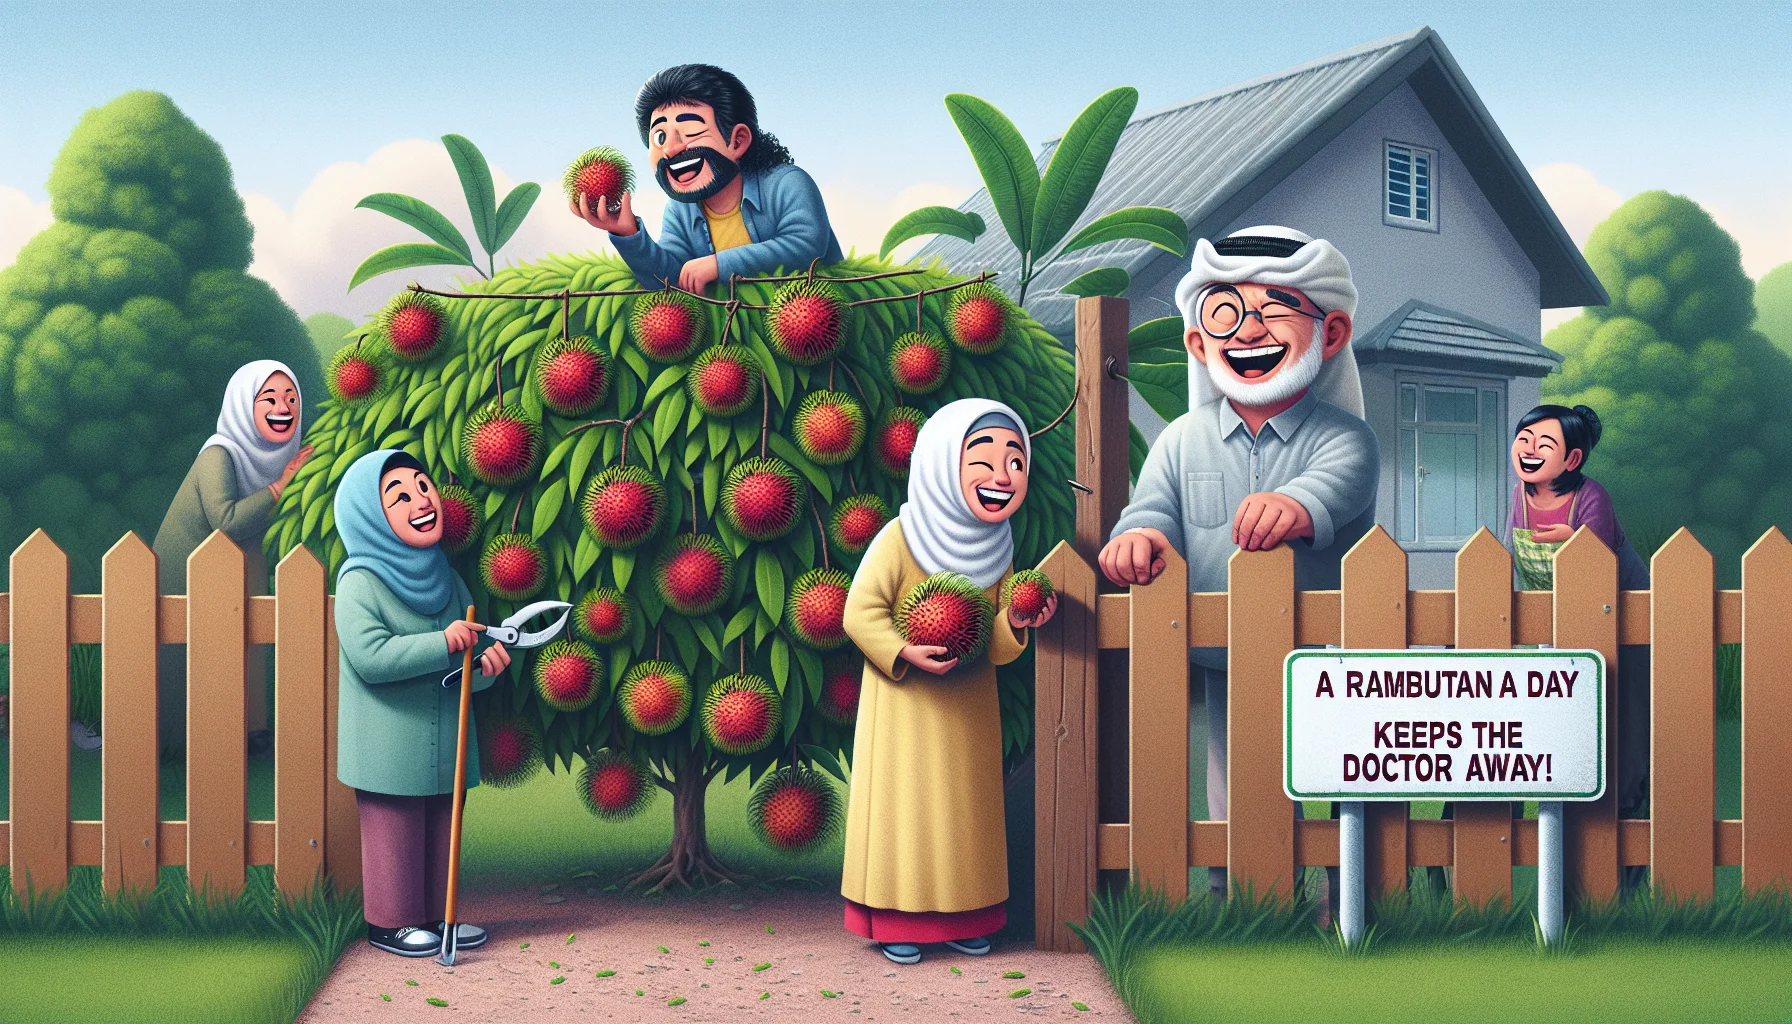 Create a funny and realistic scene of a suburban backyard garden where a Middle-Eastern male and a South Asian female are joyfully tending to their rambutan trees. The trees are laden with large, juicy rambutans which are drawing the attention of amused and envious neighbors of varying descents and genders peering over the fence. A signpost nearby humorously states: 'A Rambutan a day keeps the doctor away!' Nearby, a healthy, robust individual marks the contrast, showing the implied benefits of rambutan consumption, winking and holding a big, shiny rambutan fruit.